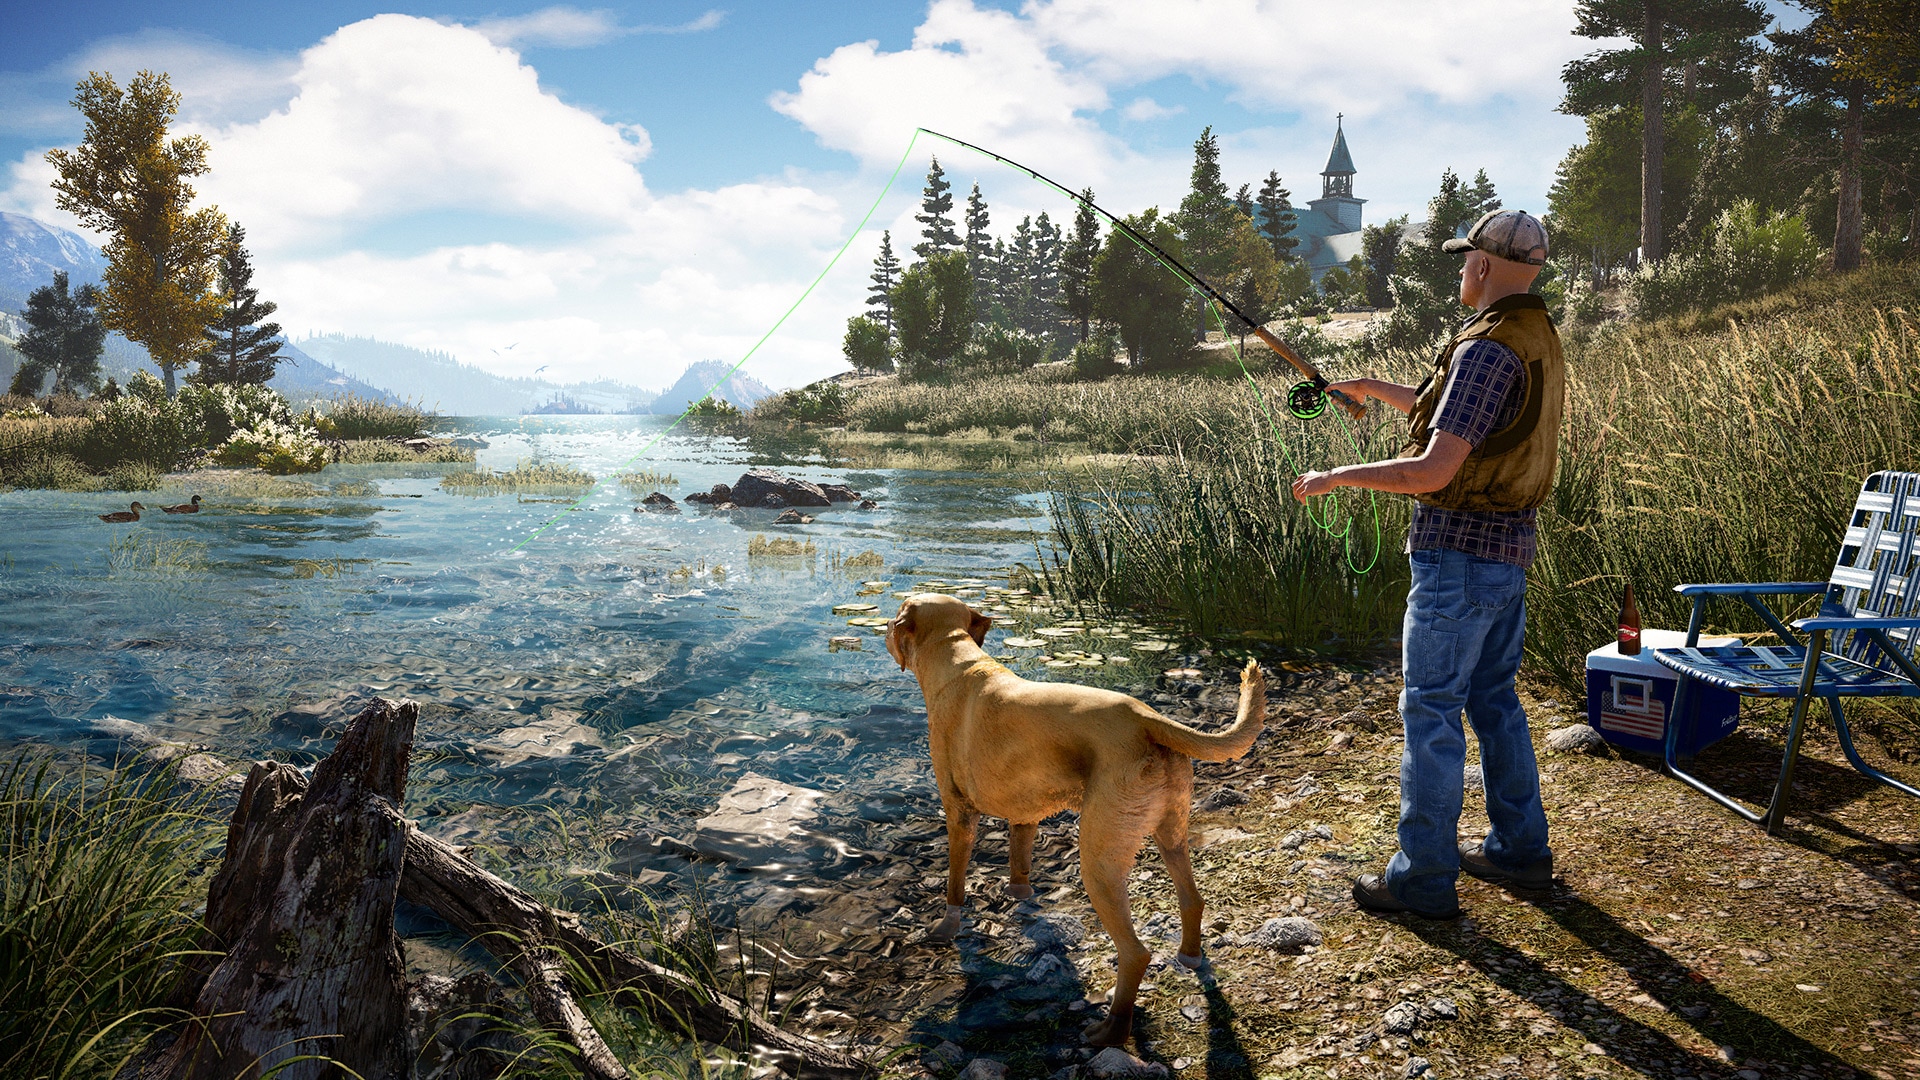 By far the most interesting aspect of Far Cry 5 appears to be its fishing mechanic